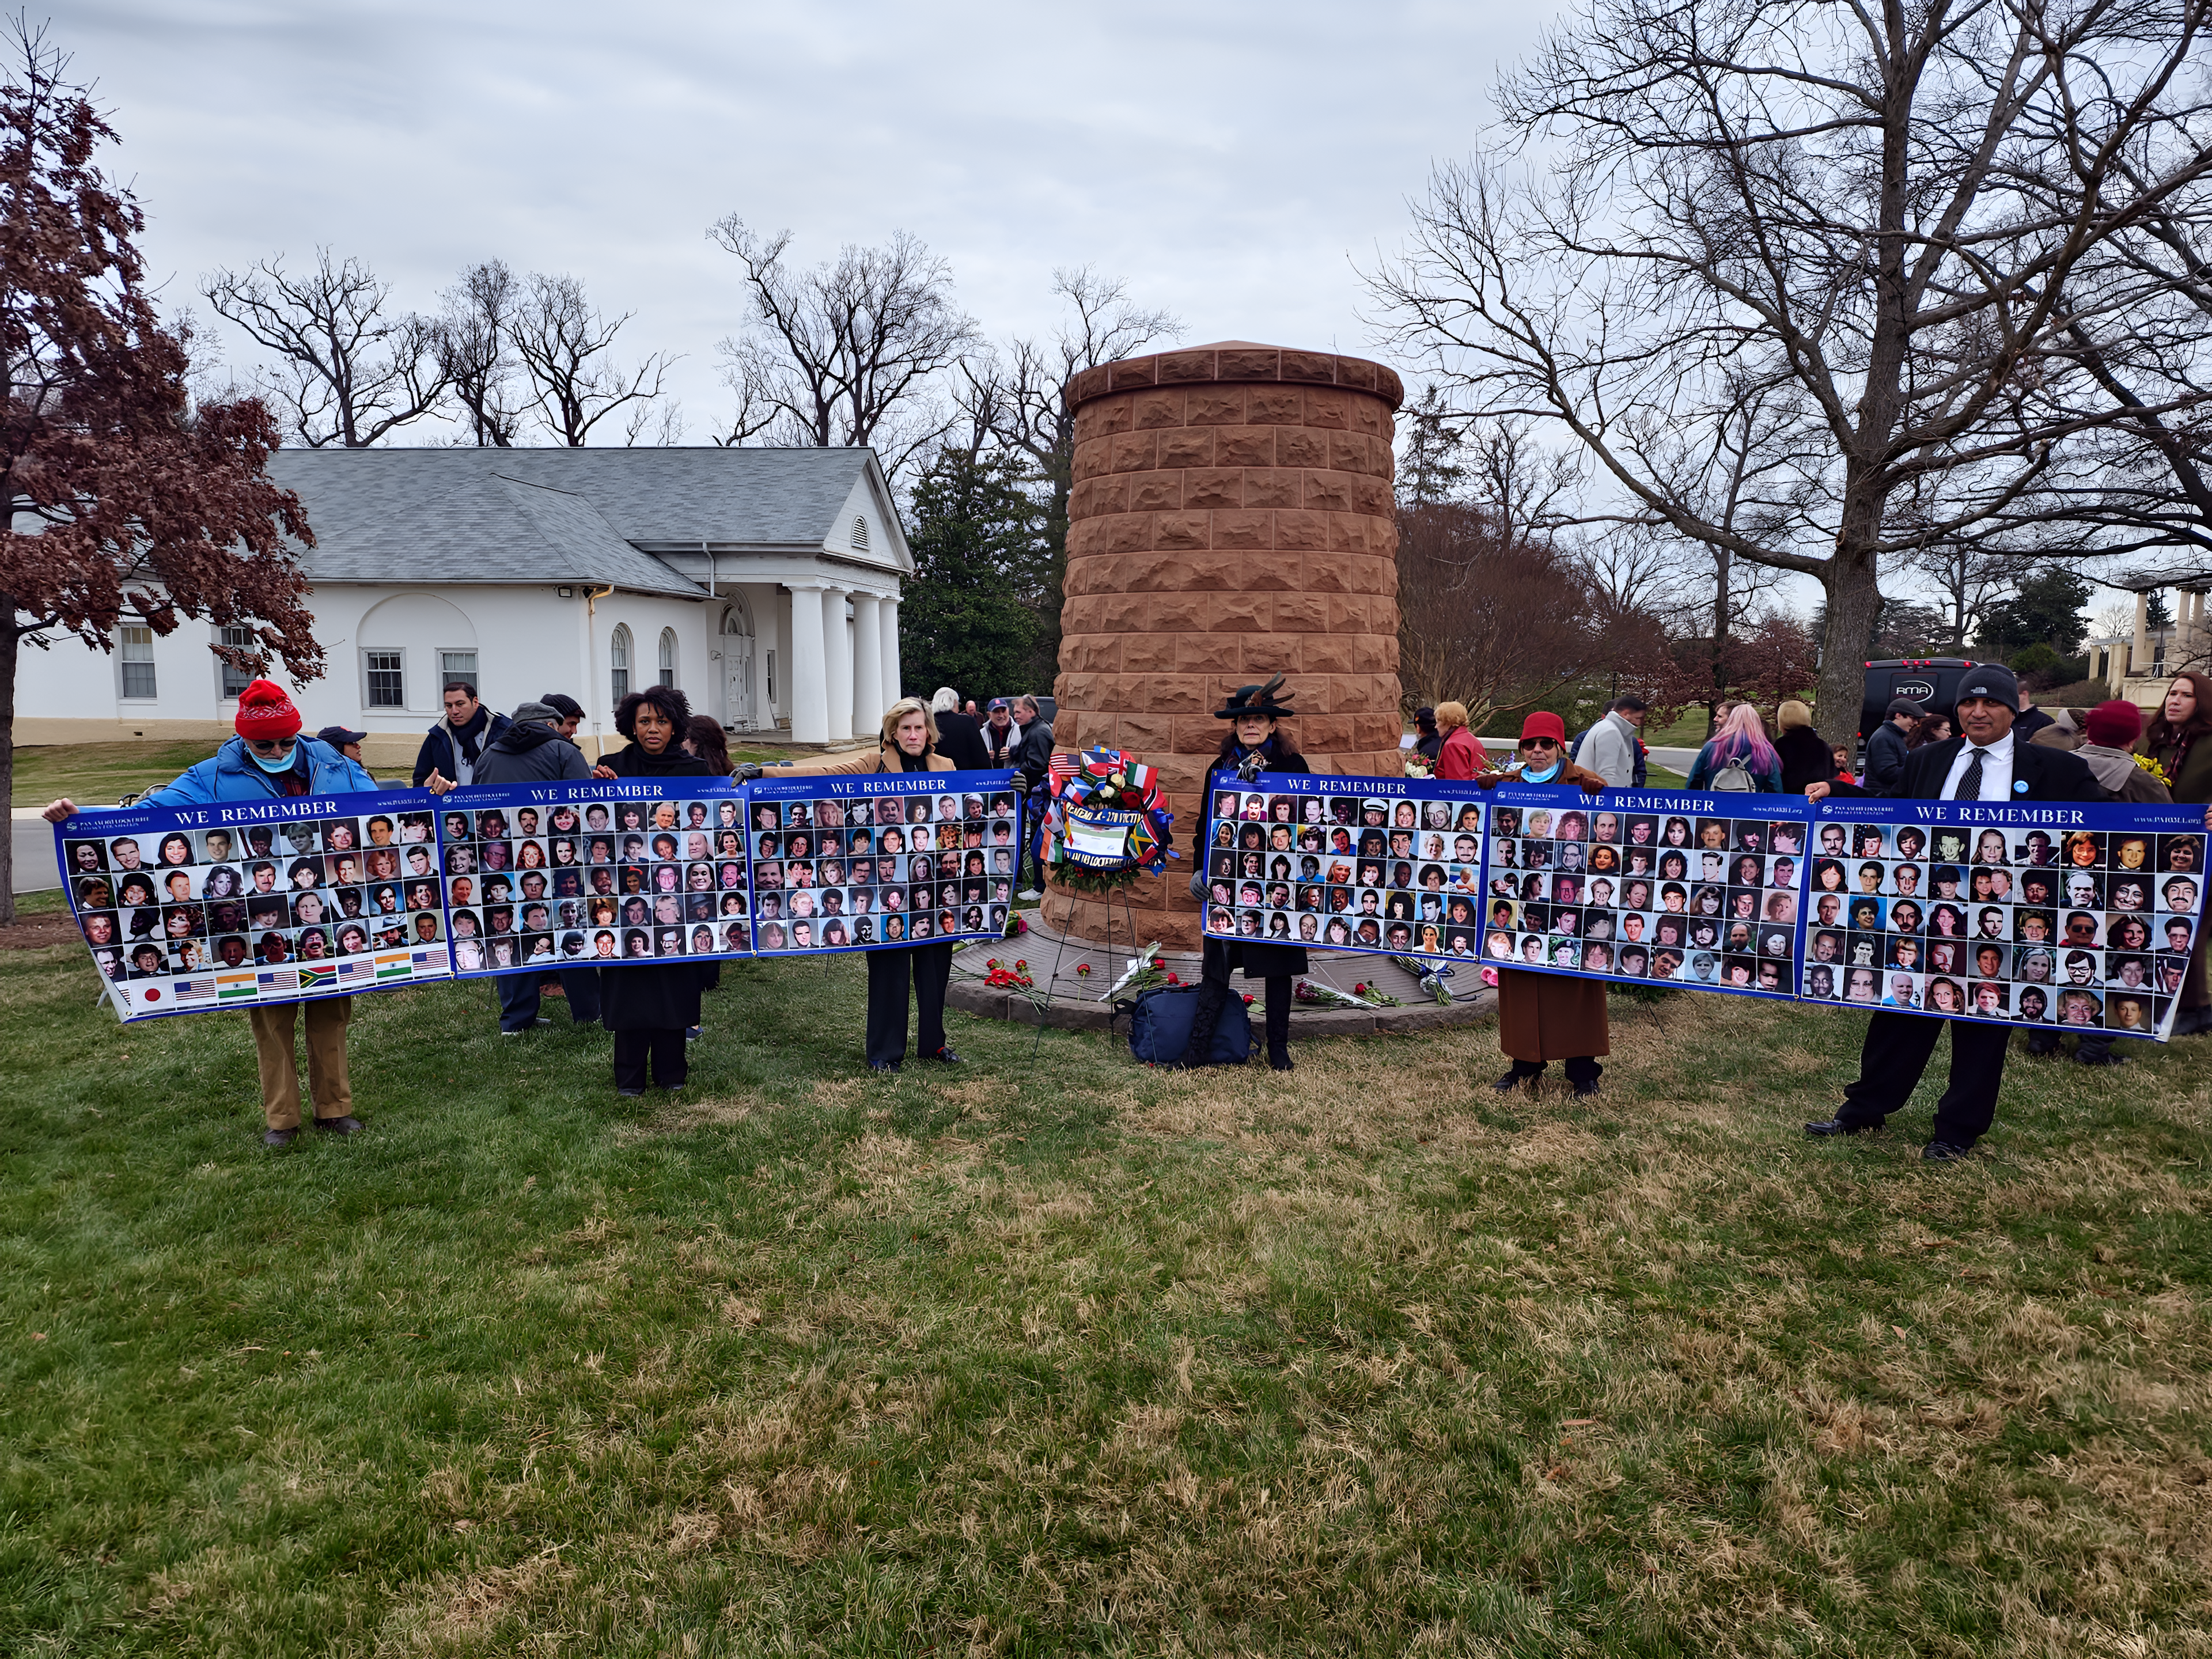 PA103LLF presents We Remember banners at Arlington National Cemetery